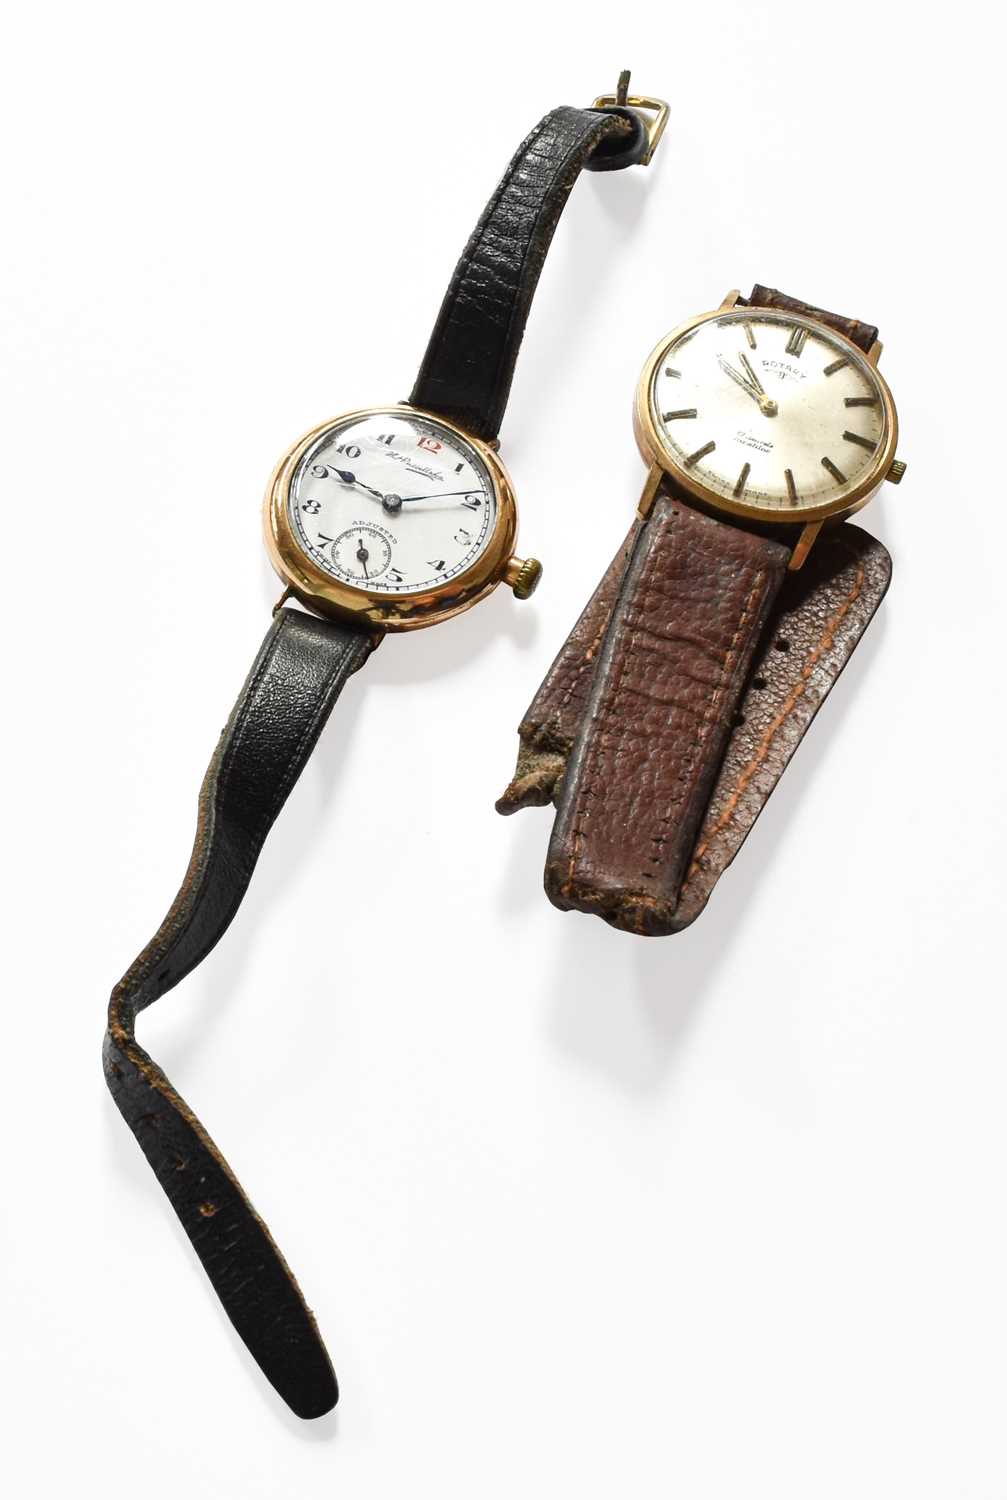 A 9 carat Gold Rotary Wristwatch, and a gold-plated enamel dial wristwatch